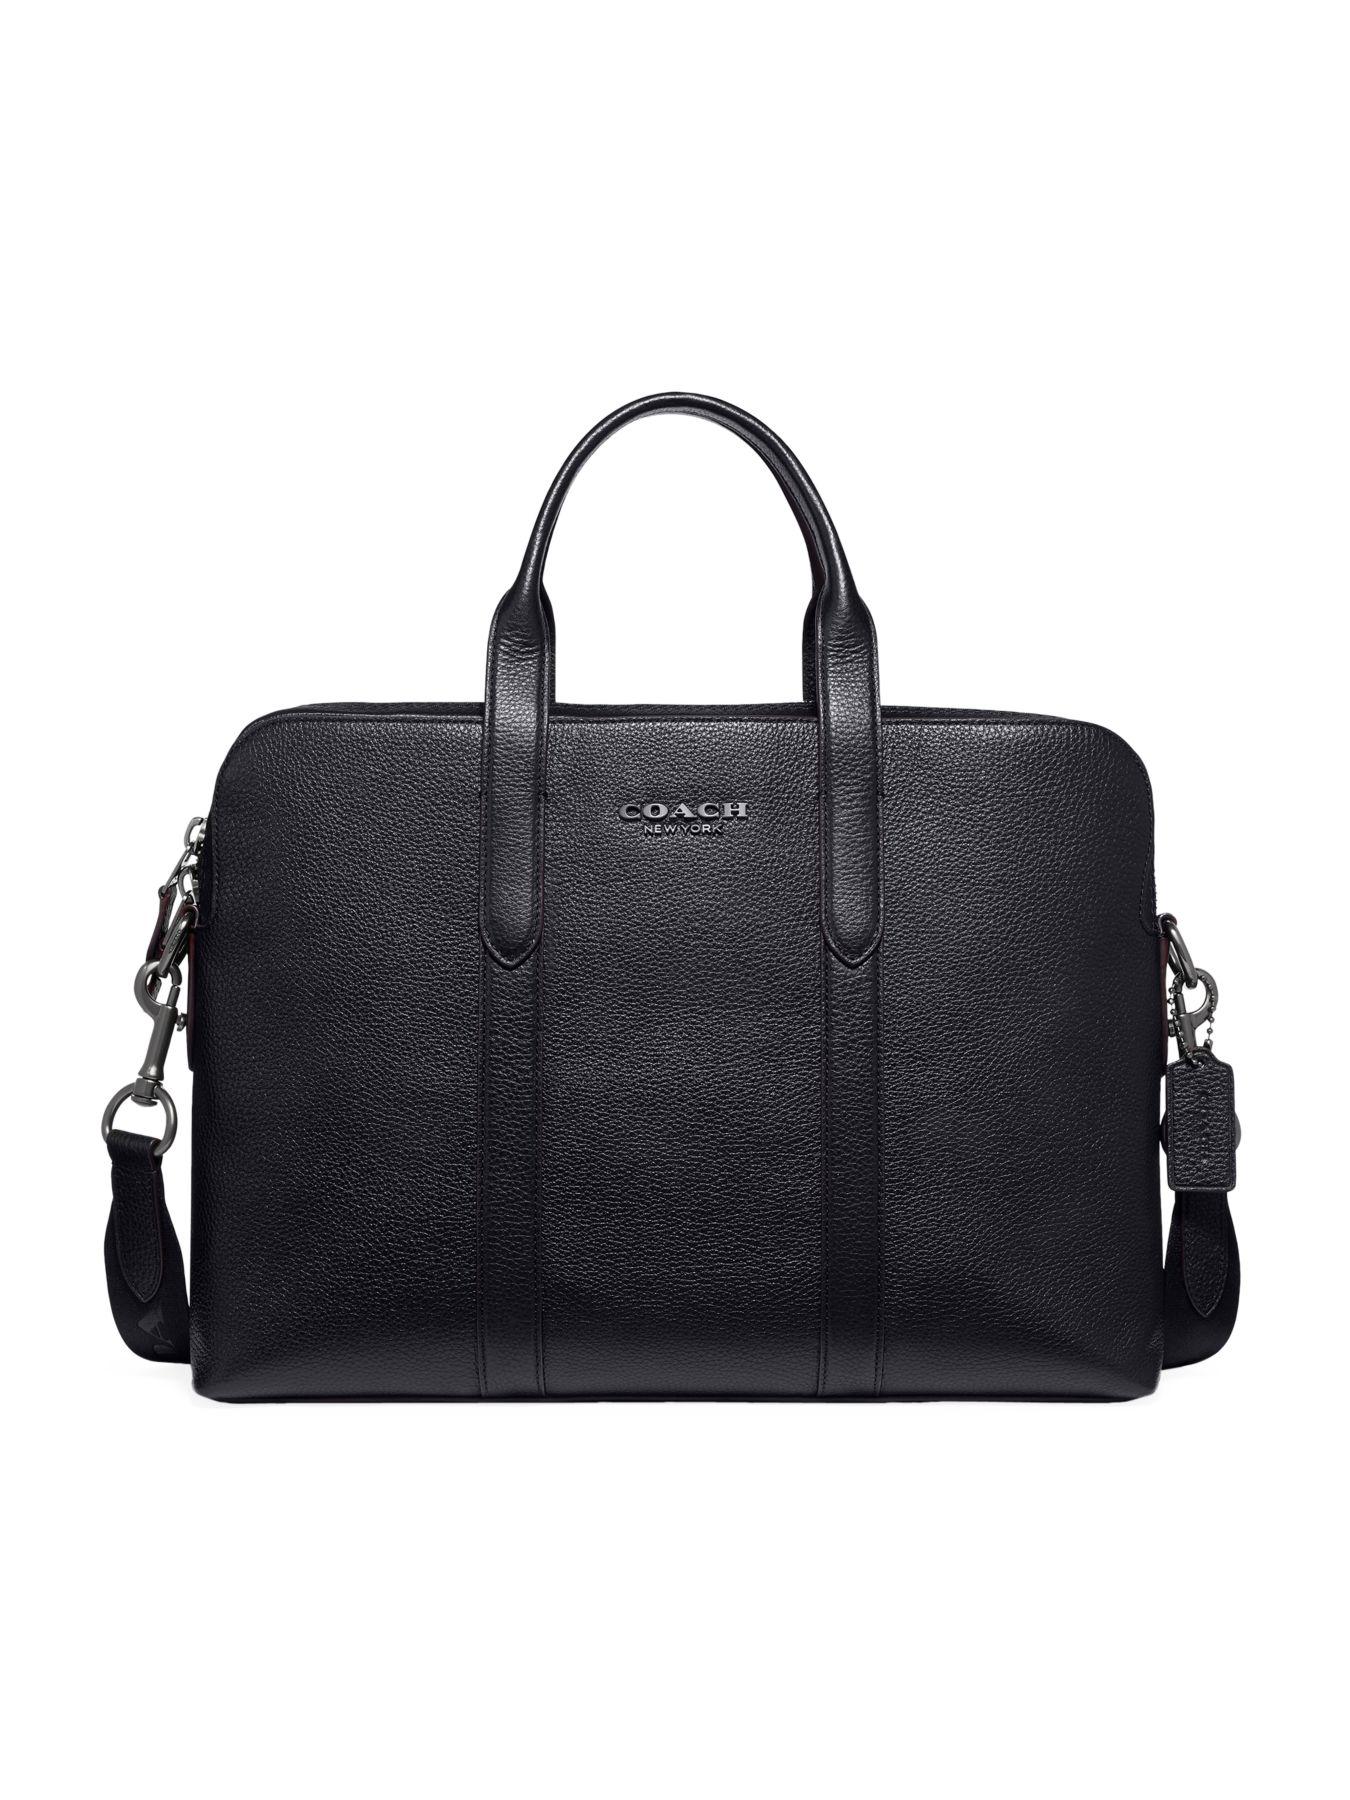 COACH Metropolitan Pebbled Leather Briefcase in qb Midnight (Black) for ...